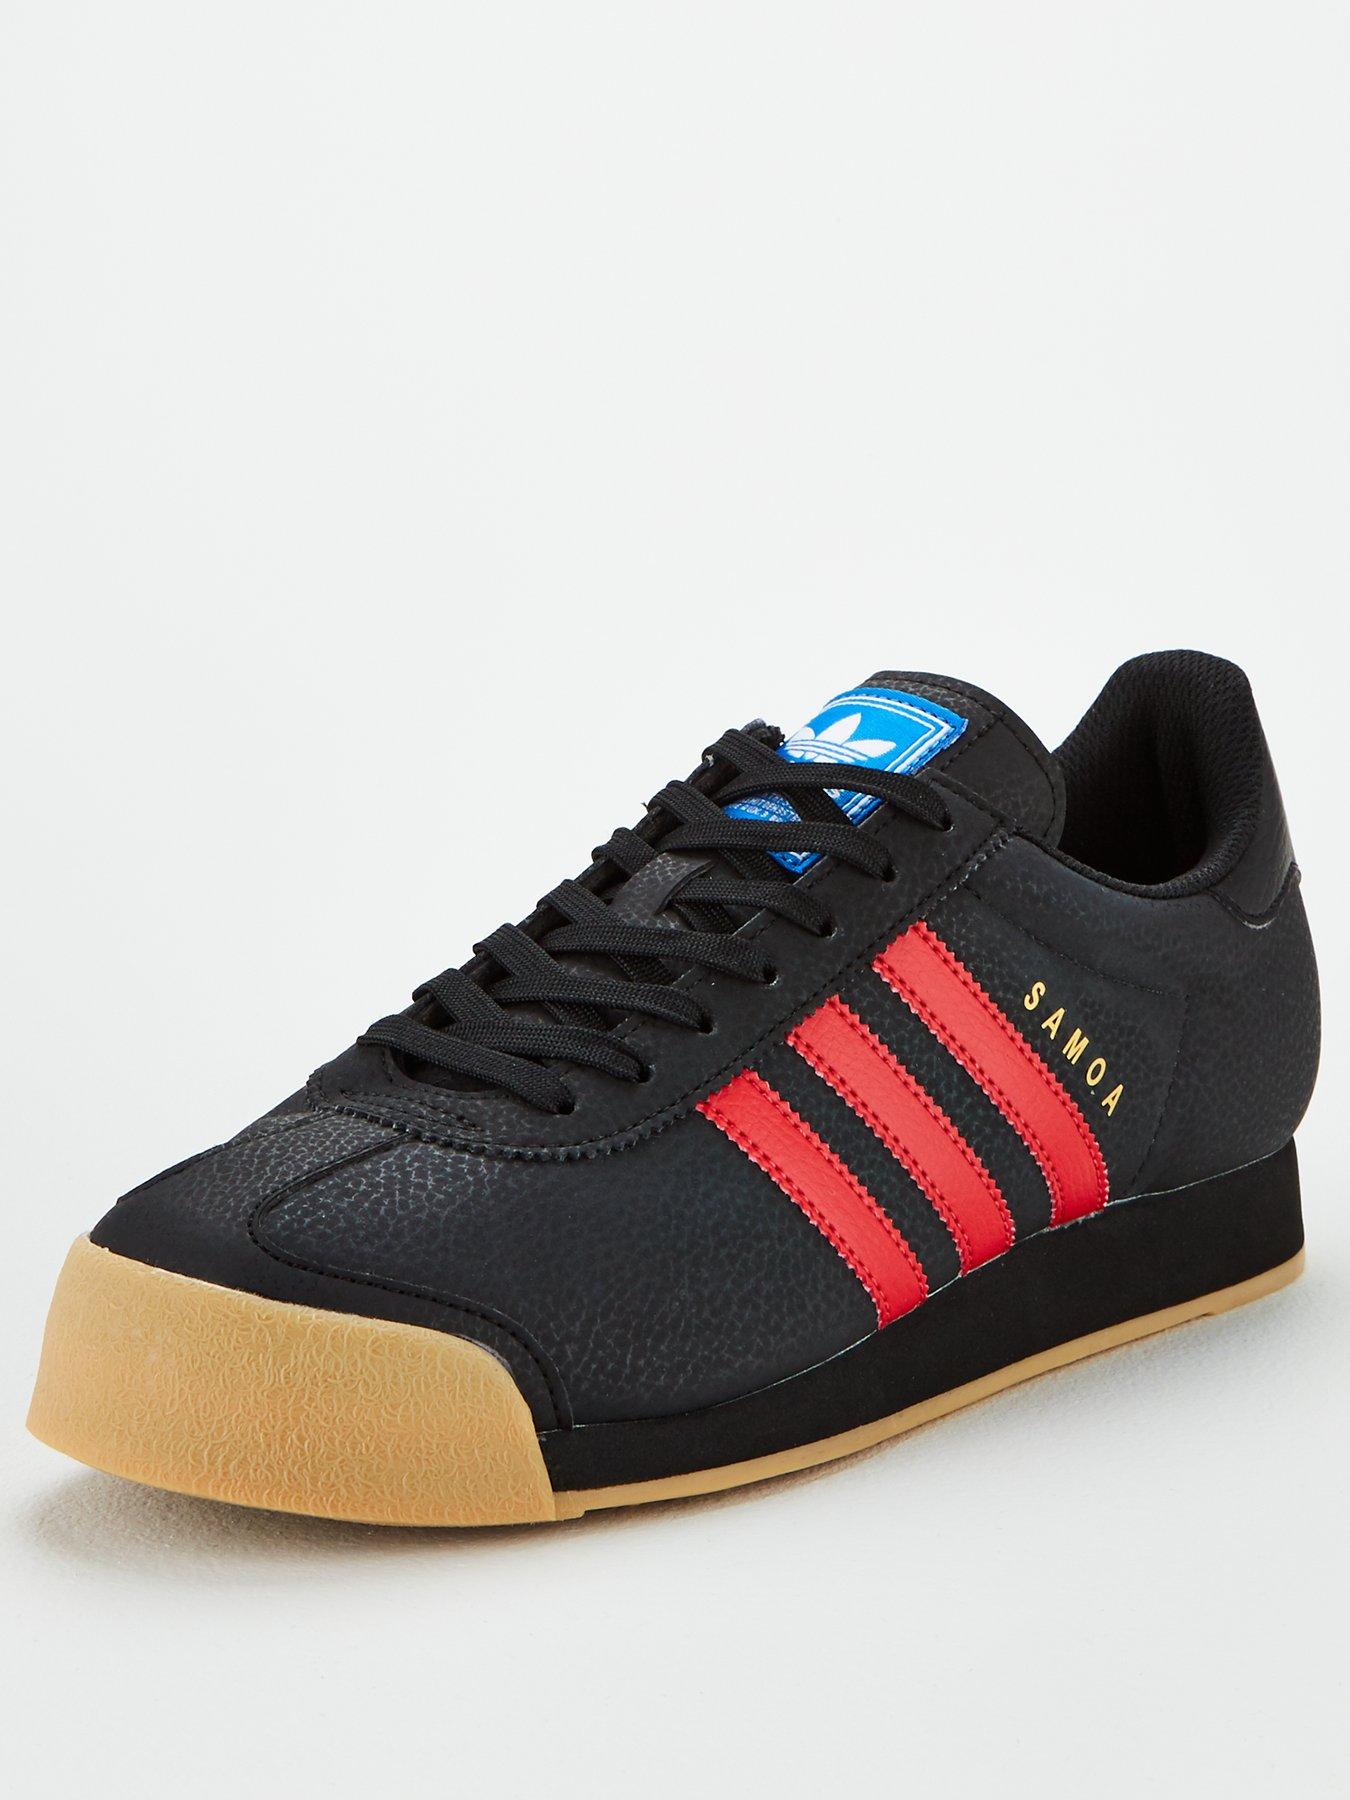 adidas trainers black with red stripes